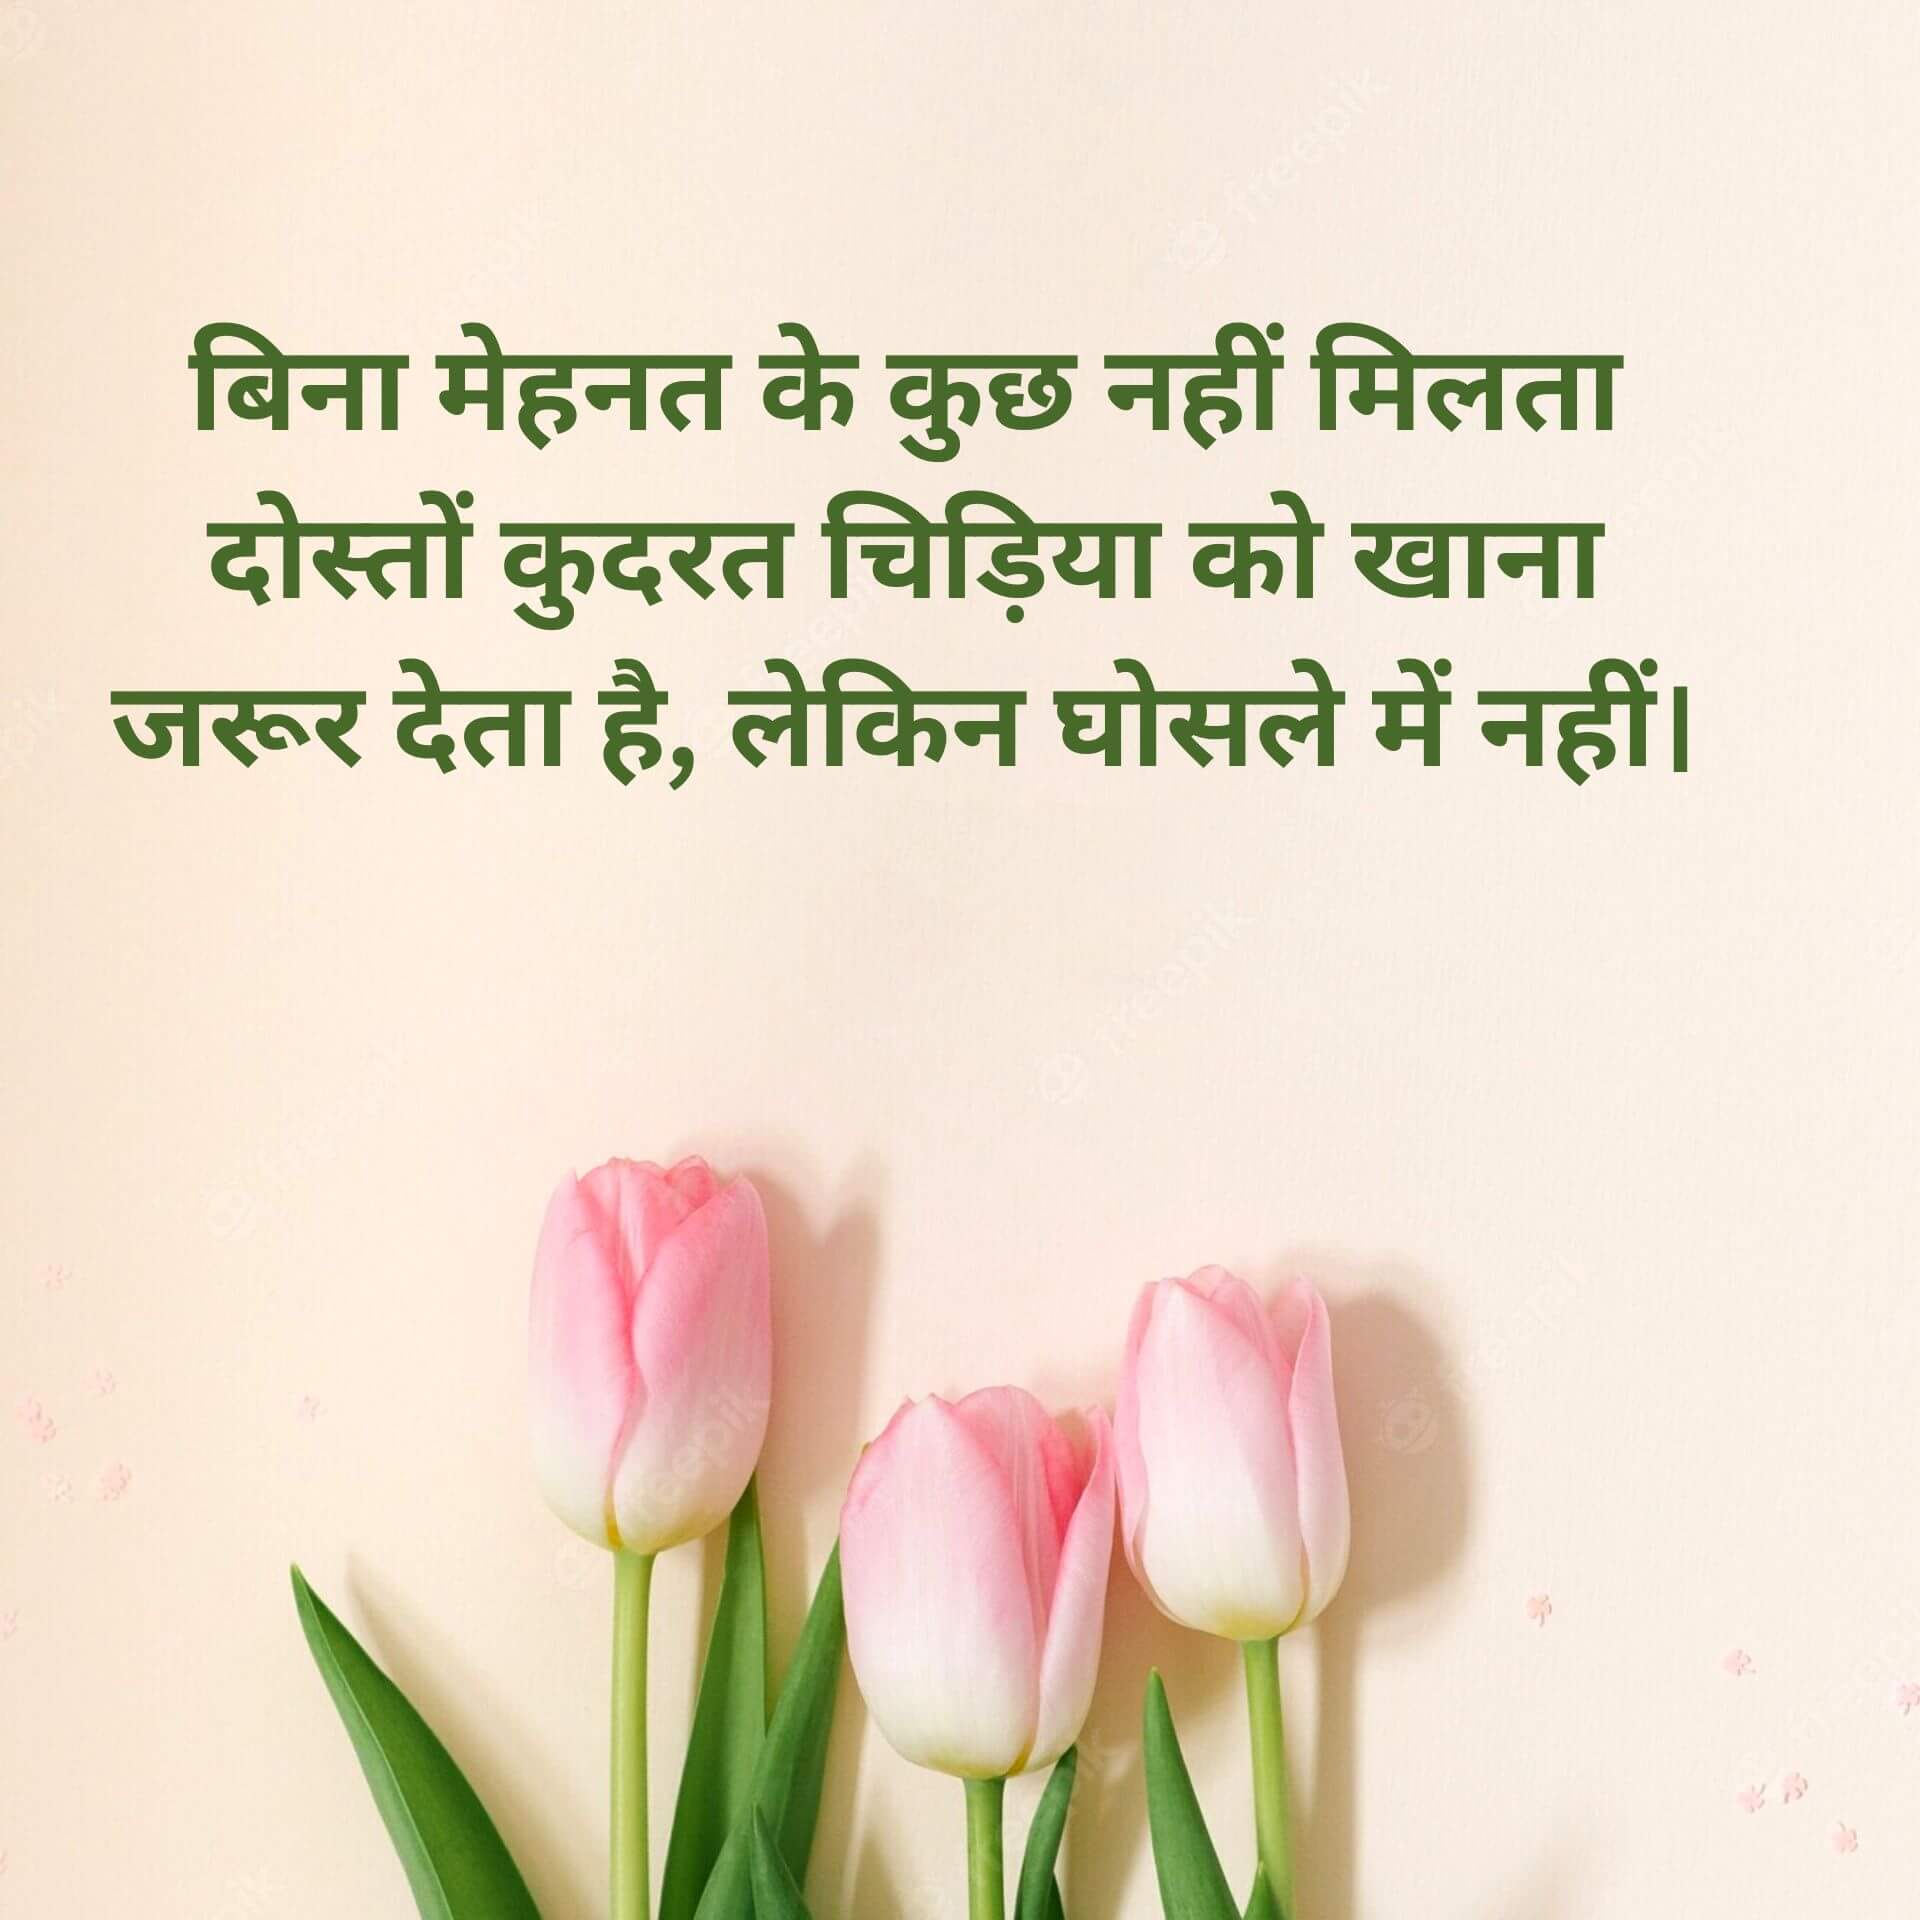 Free Best Hindi Motivational Quotes Wallpaper Download